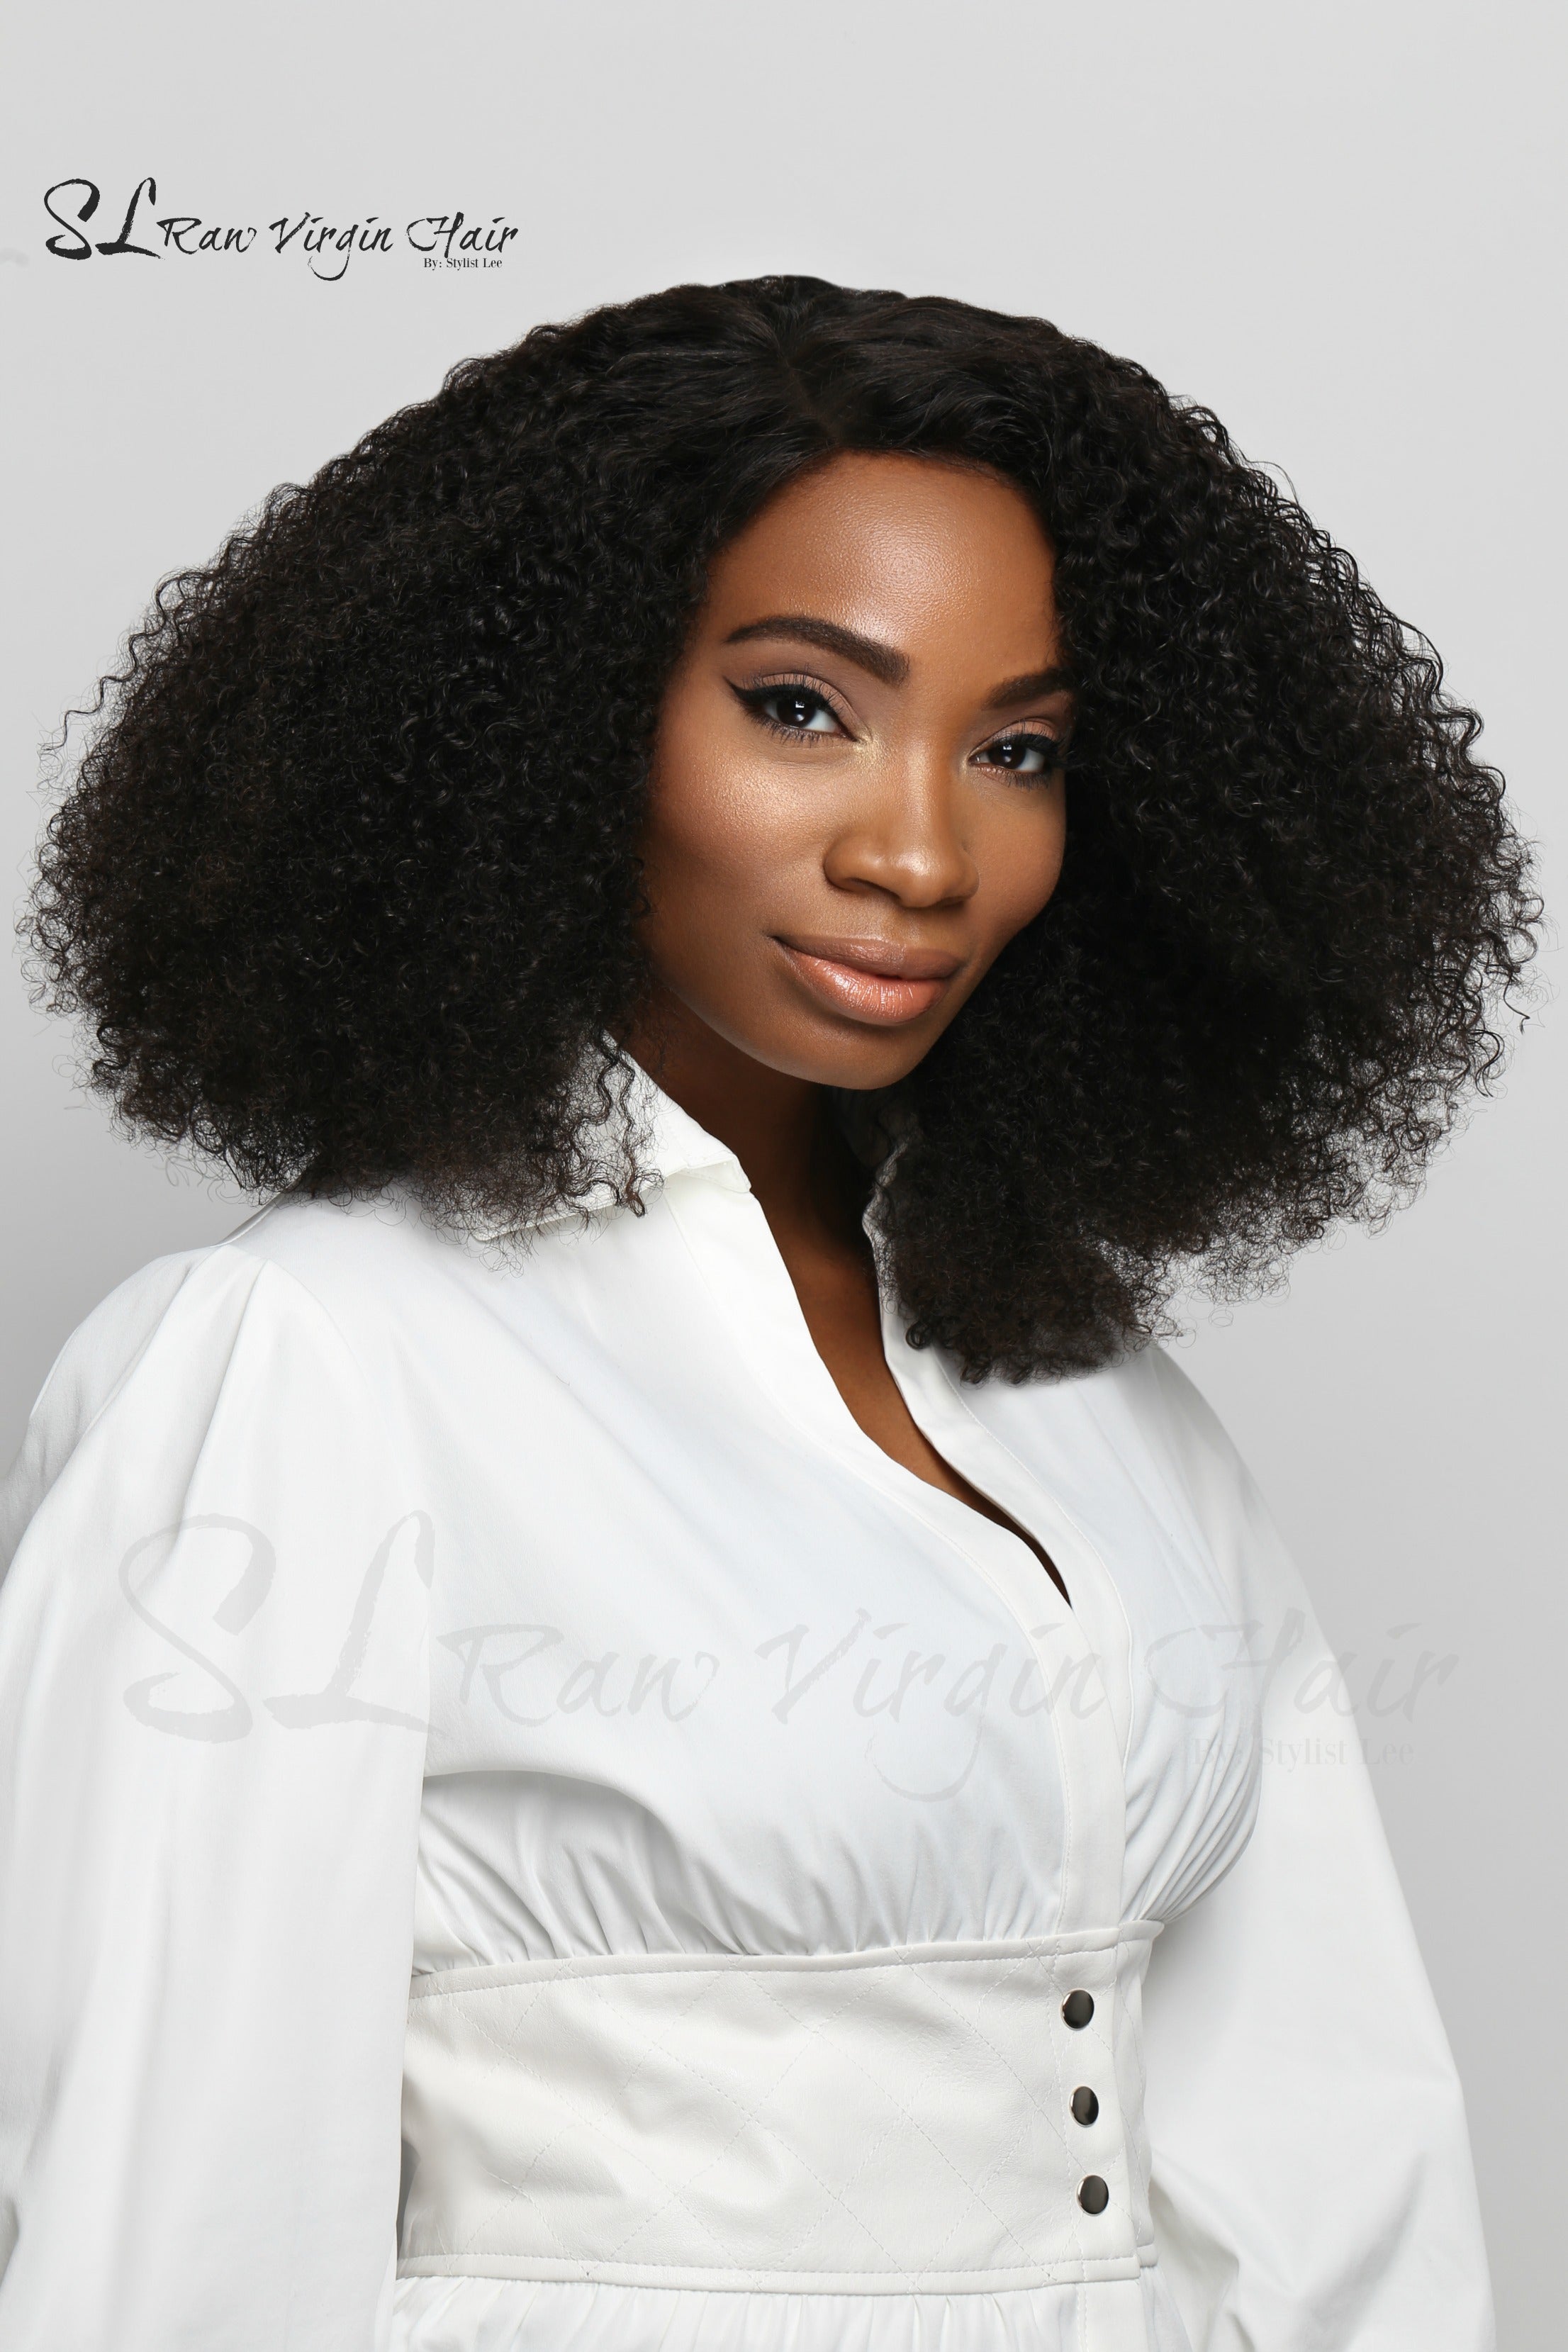 Side part Kinky Curly hair extensions on Black woman Model in 18 inches by SL Raw Virgin Hair Company